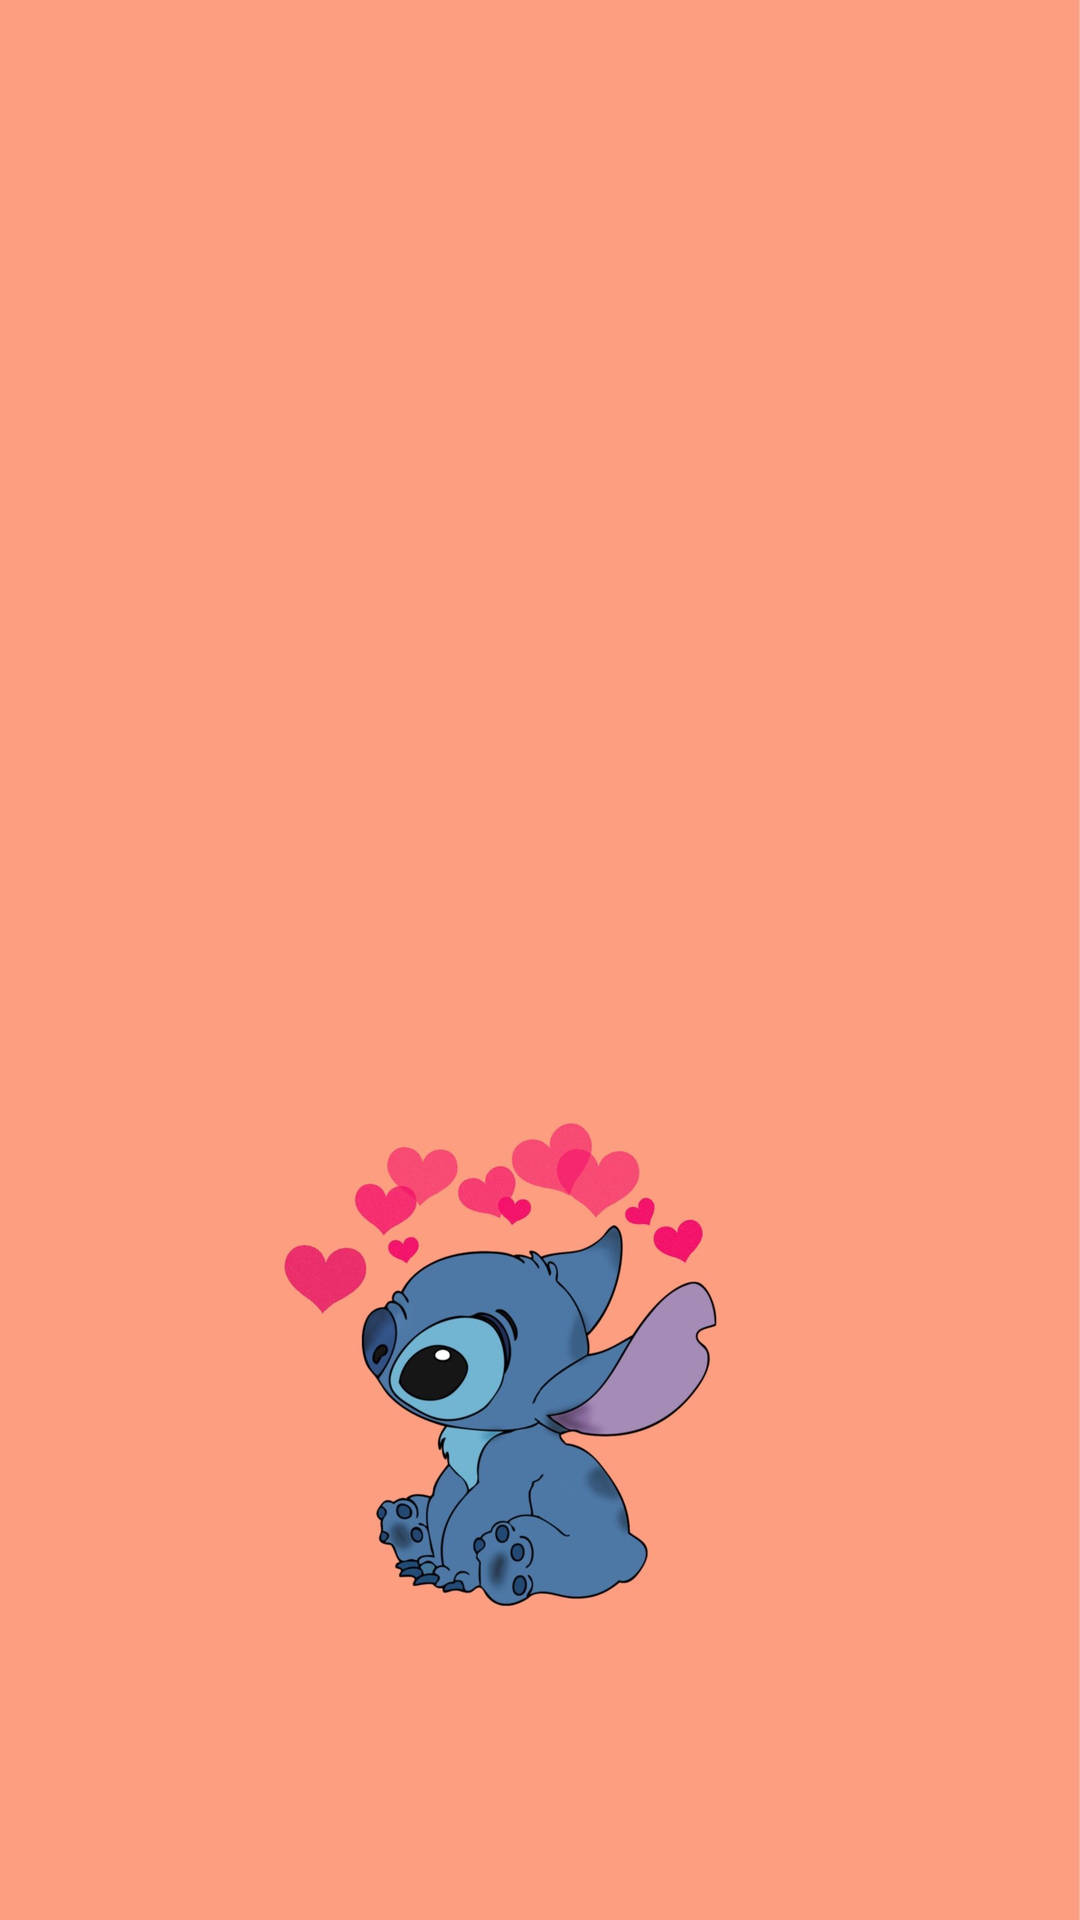 Cute Aesthetic Stitch Pink Heart Emojis Background